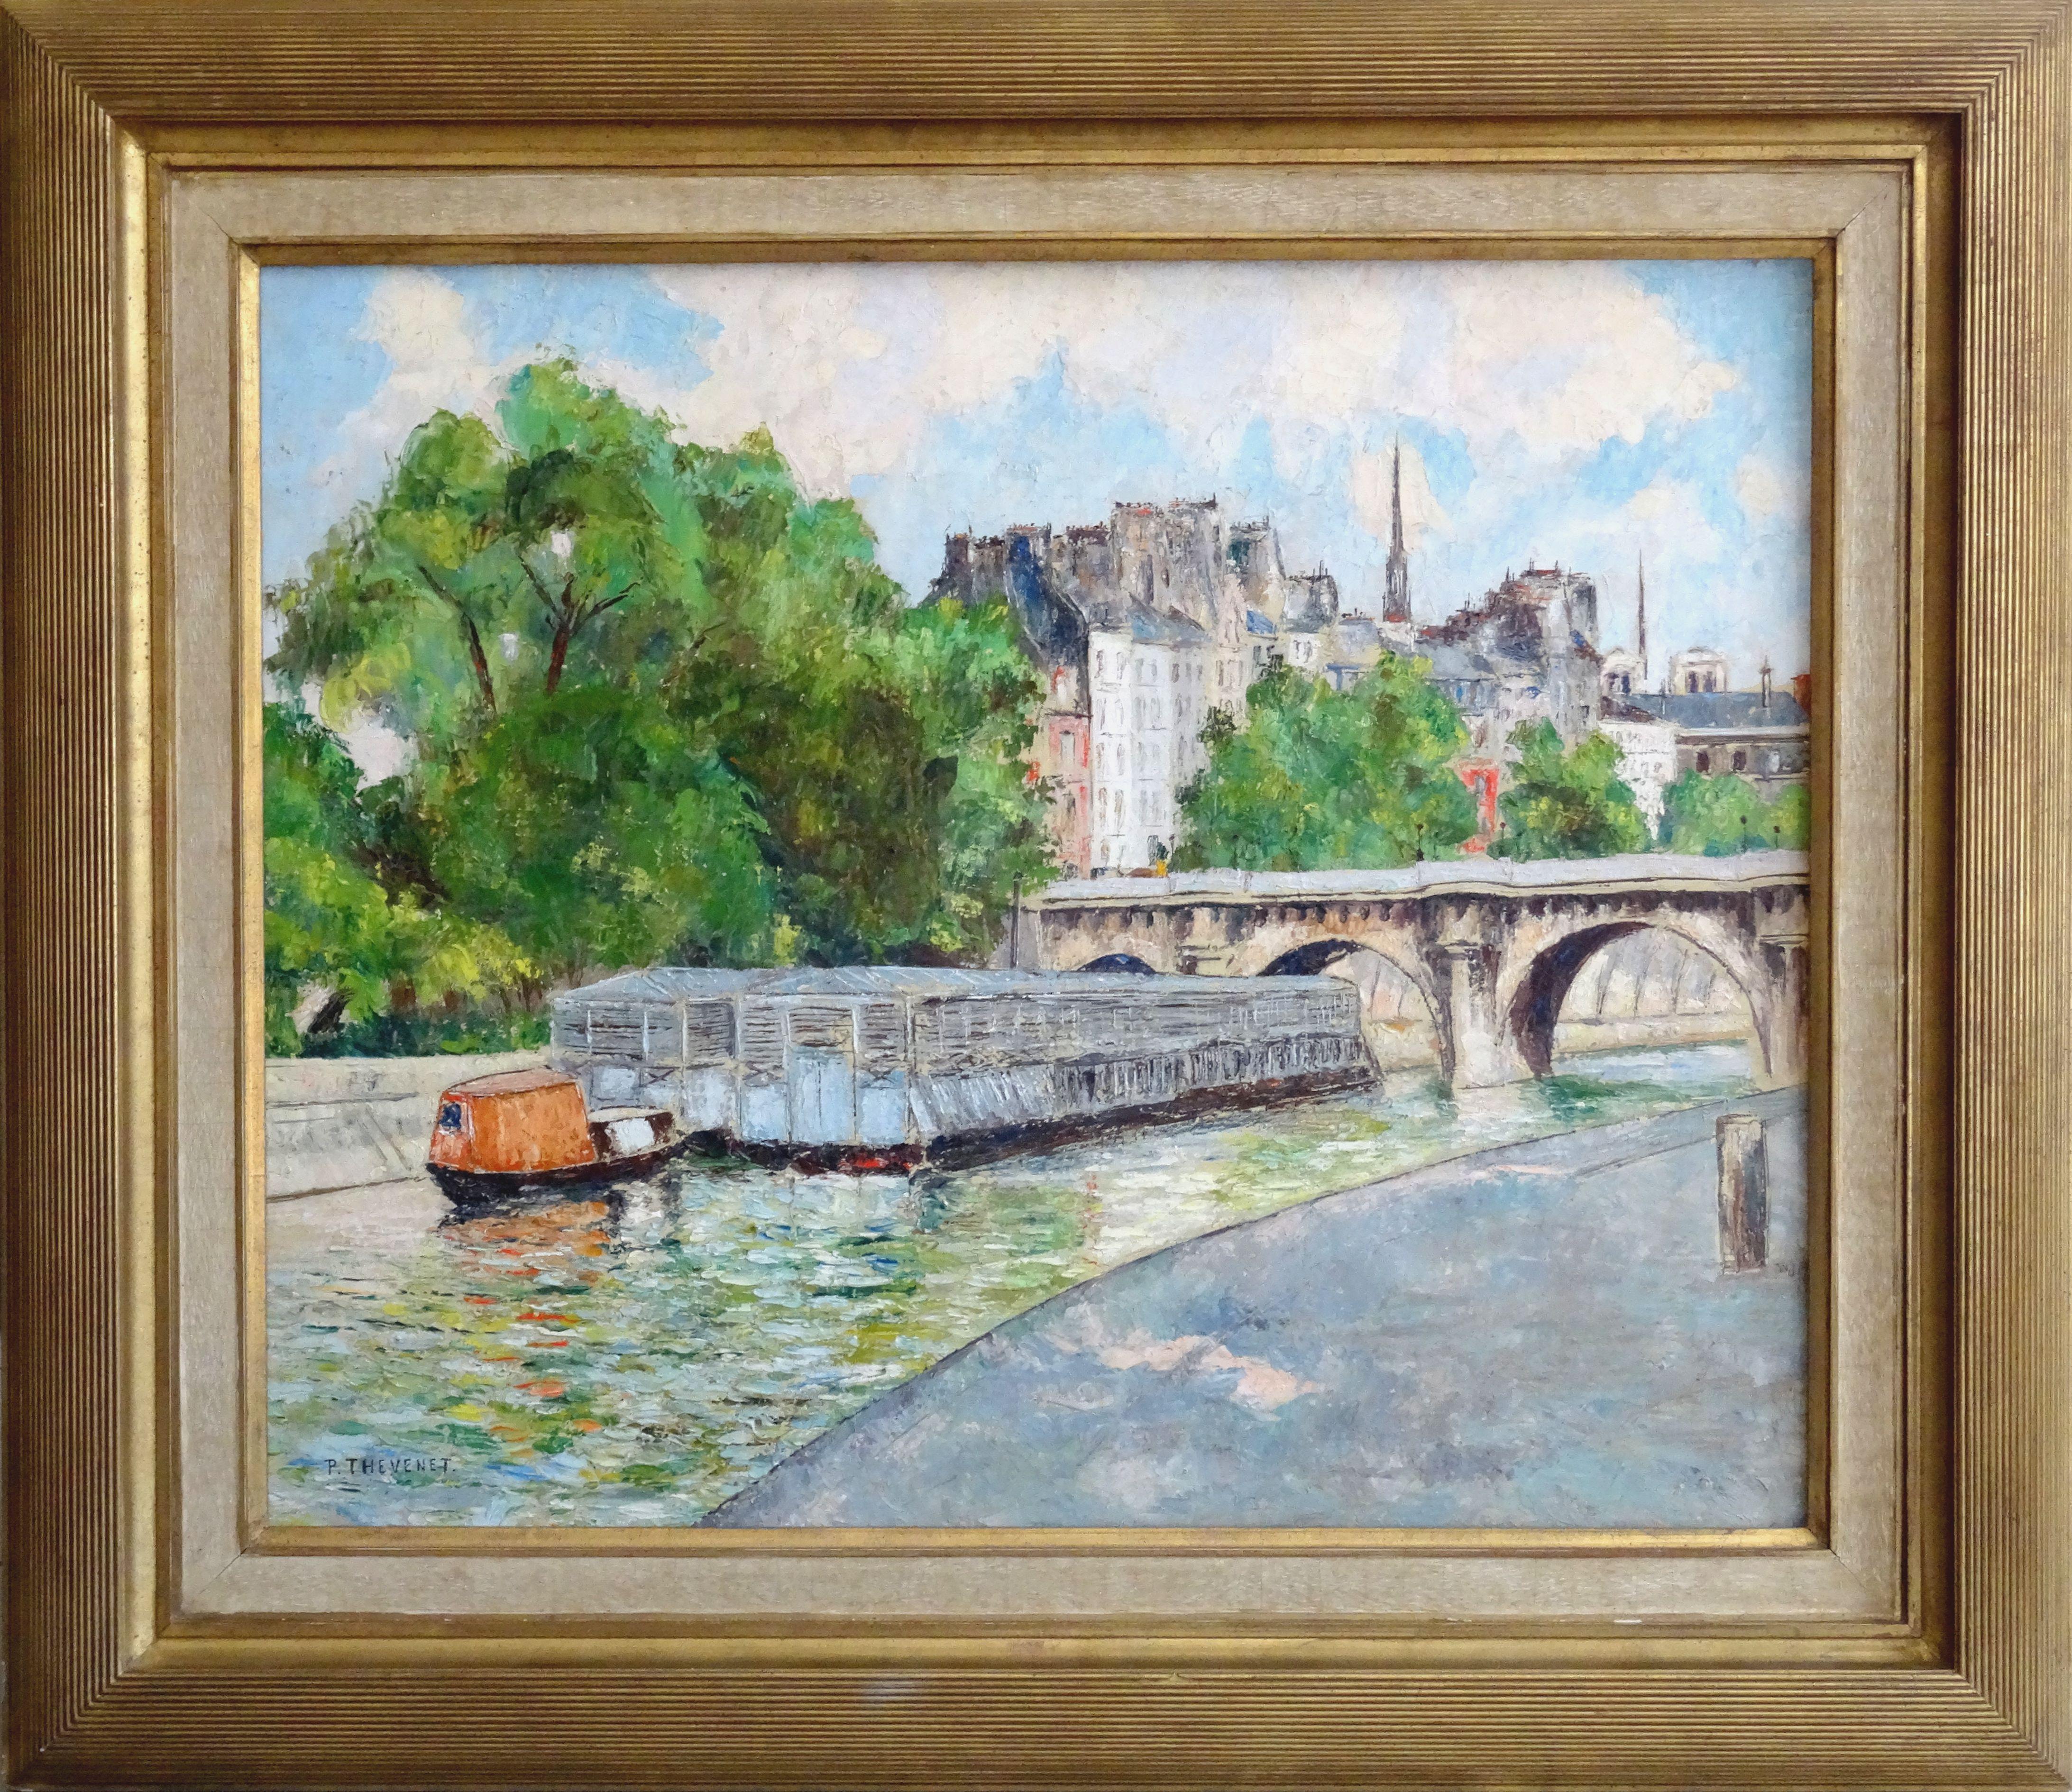 The new bridge. Oil on canvas, 60, 5x70, 5 cm - Painting by Pierre Thevenet